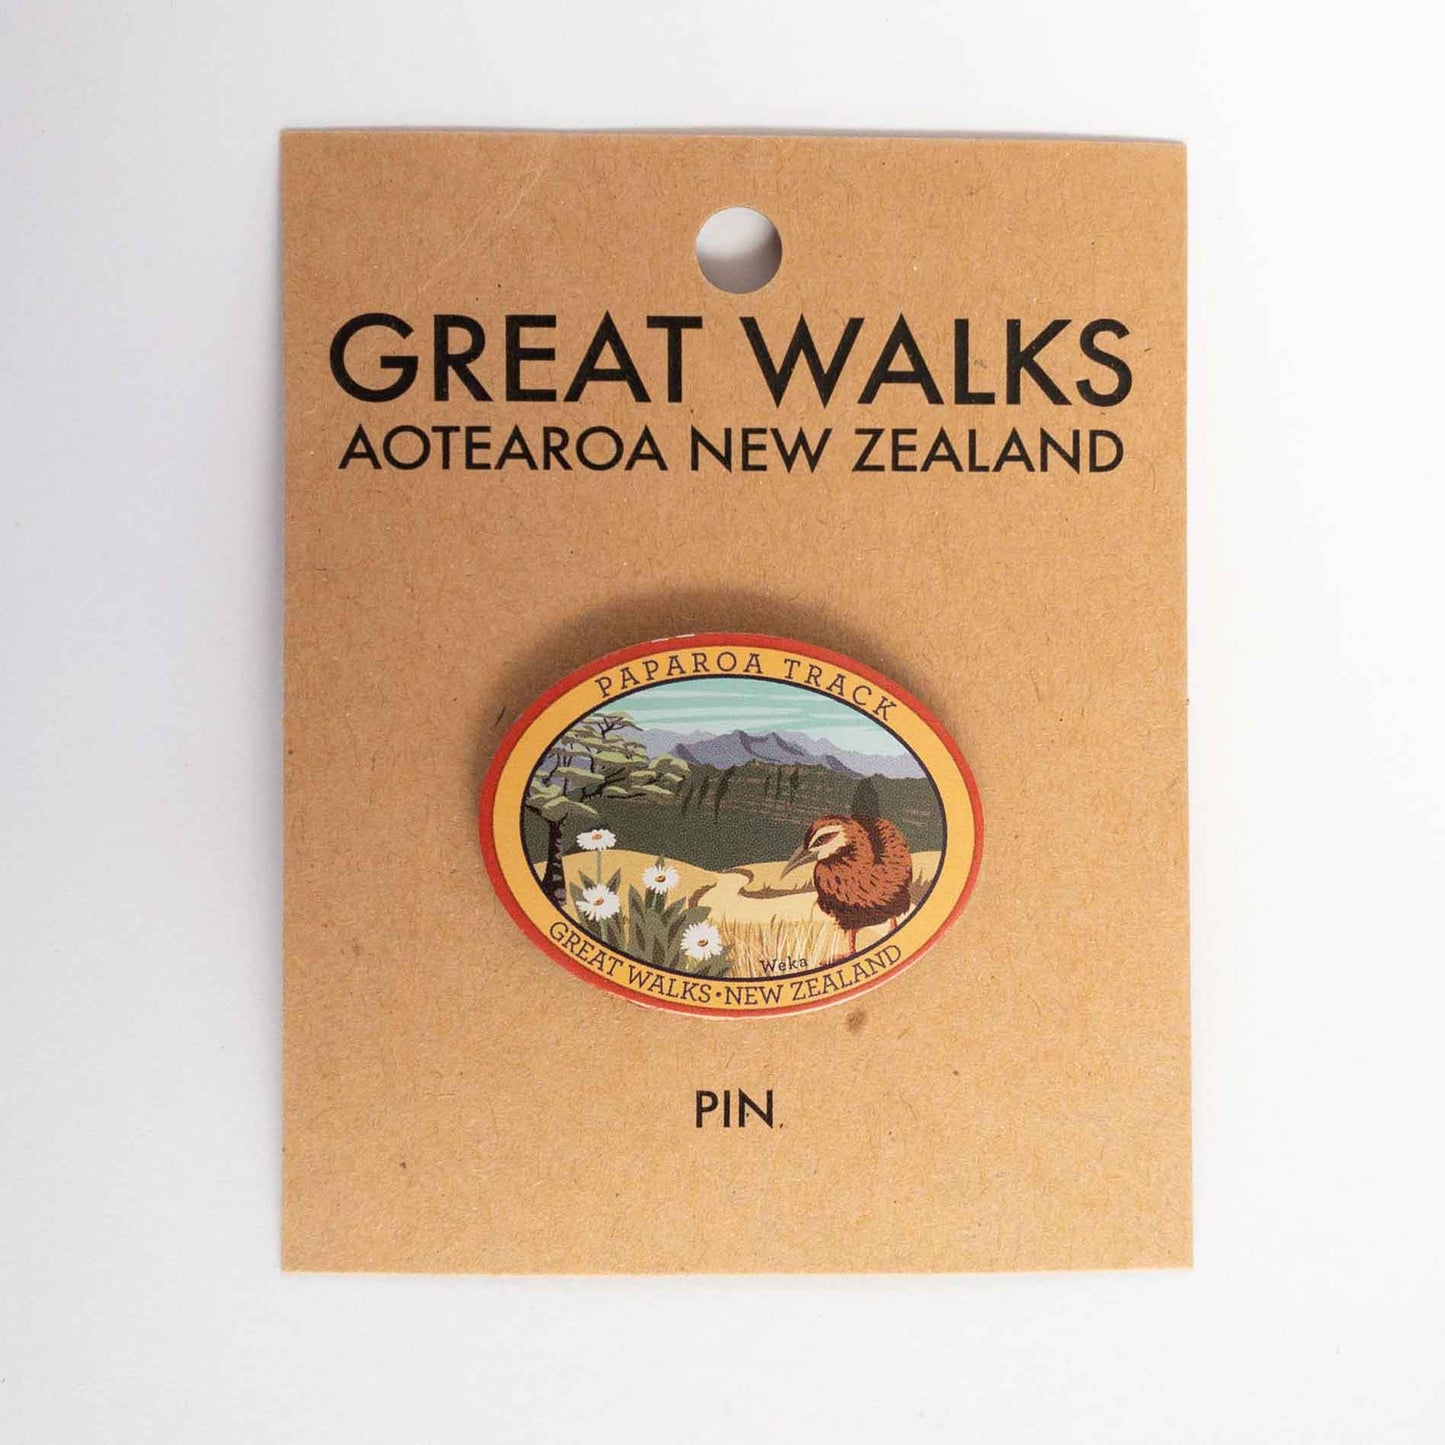 Oval Milford Track pin, with a whio/blue duck, blue peak and mountain buttercup, on brown kraft backing card.